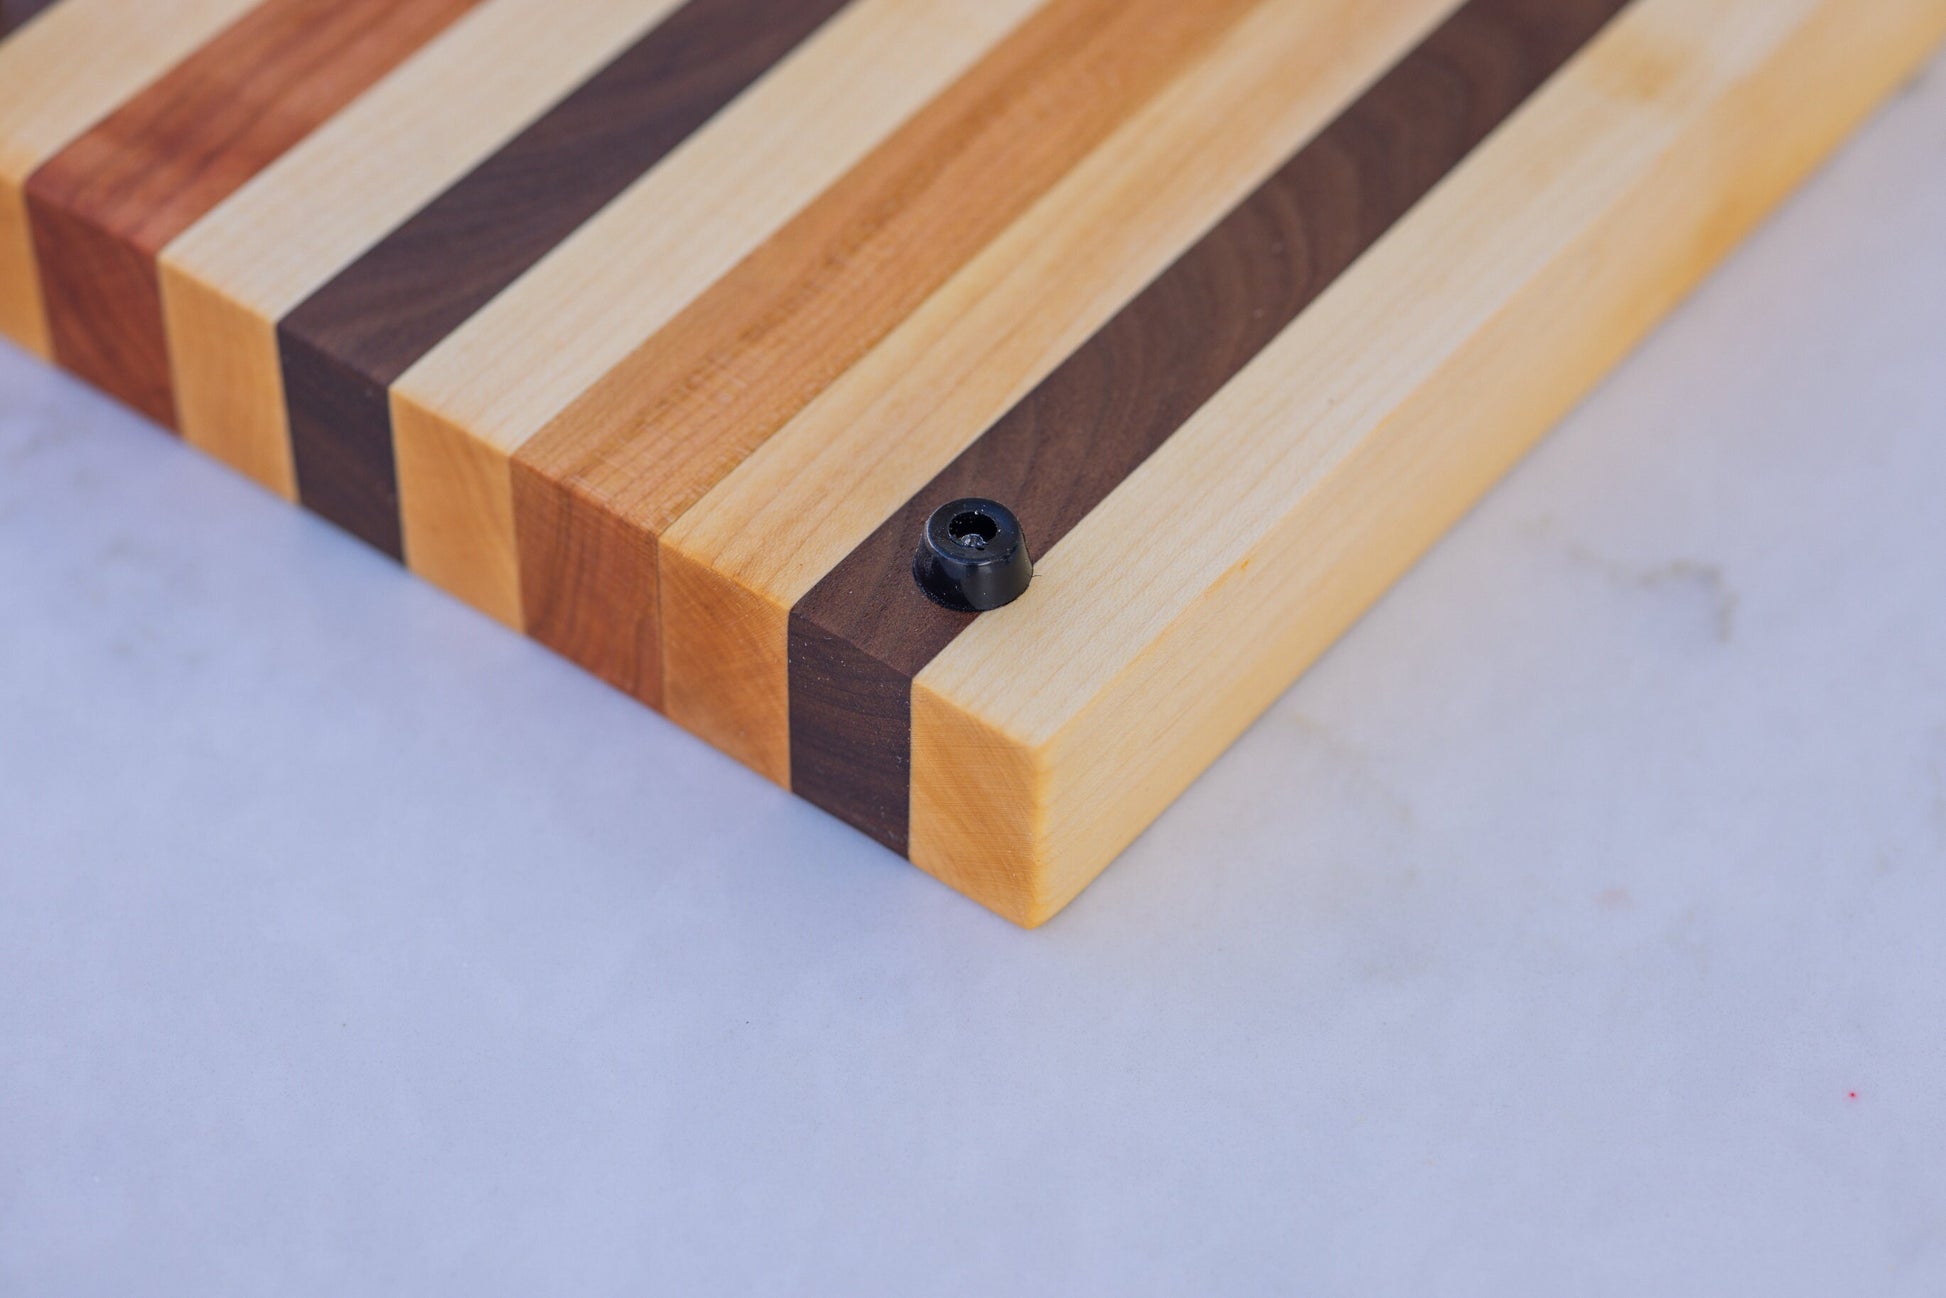 Small Maple and Cherry Cutting Board (12x9)